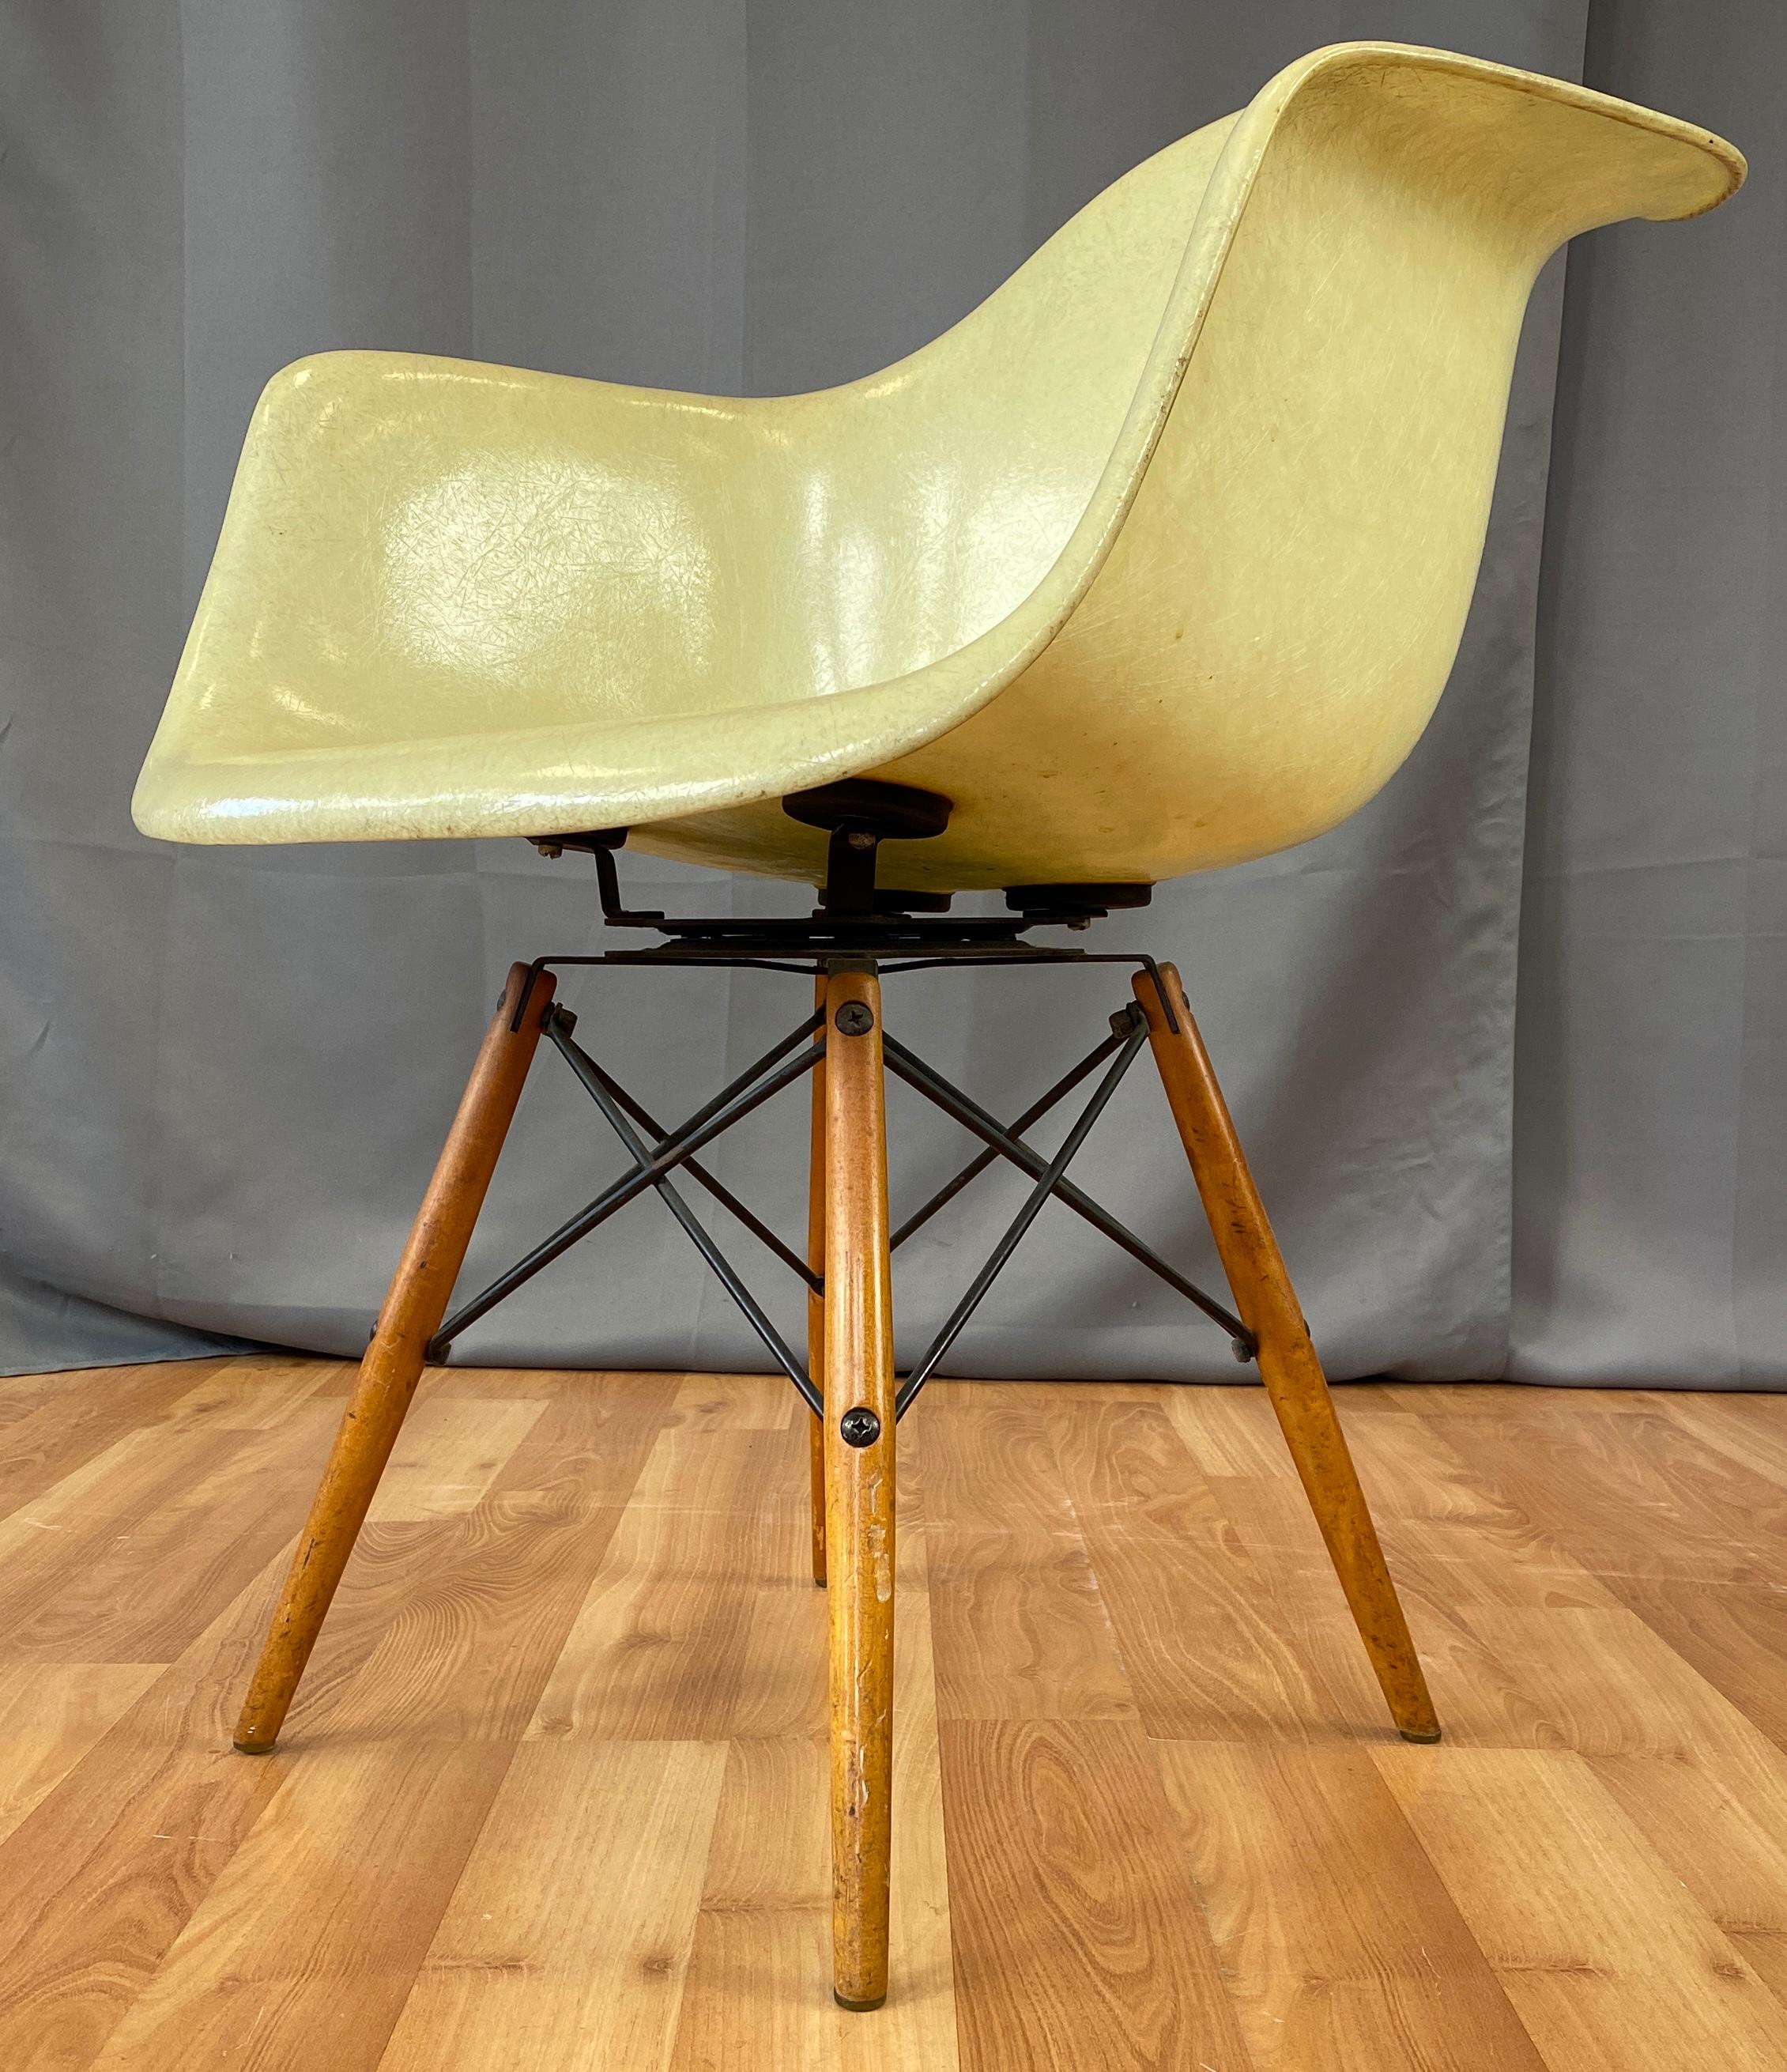 Offered here is a 1st generation Zenith Plastics Co PAW rope edge chair, designed by Charles Eames for Herman Miller.
Chair swivels is in a lemon yellow, 4 square zenith plastic checkerboard label underneath.